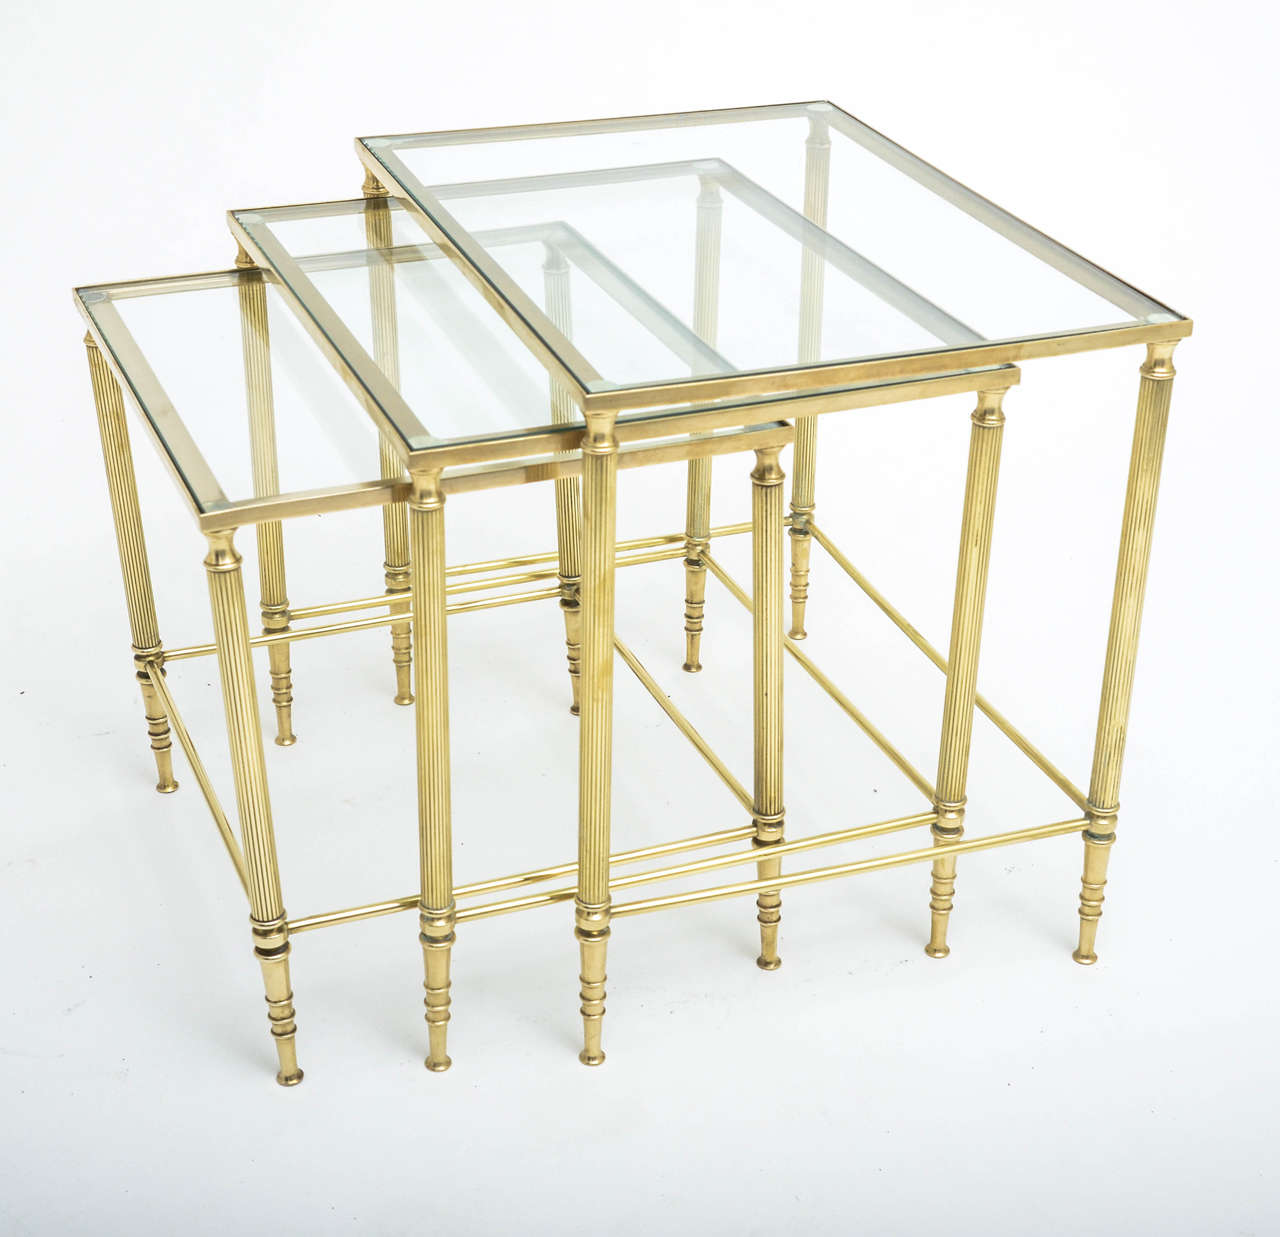 A 1950s, French, Baguès-style nest of three tables with reeded brass legs. Dimensions listed are for largest table.